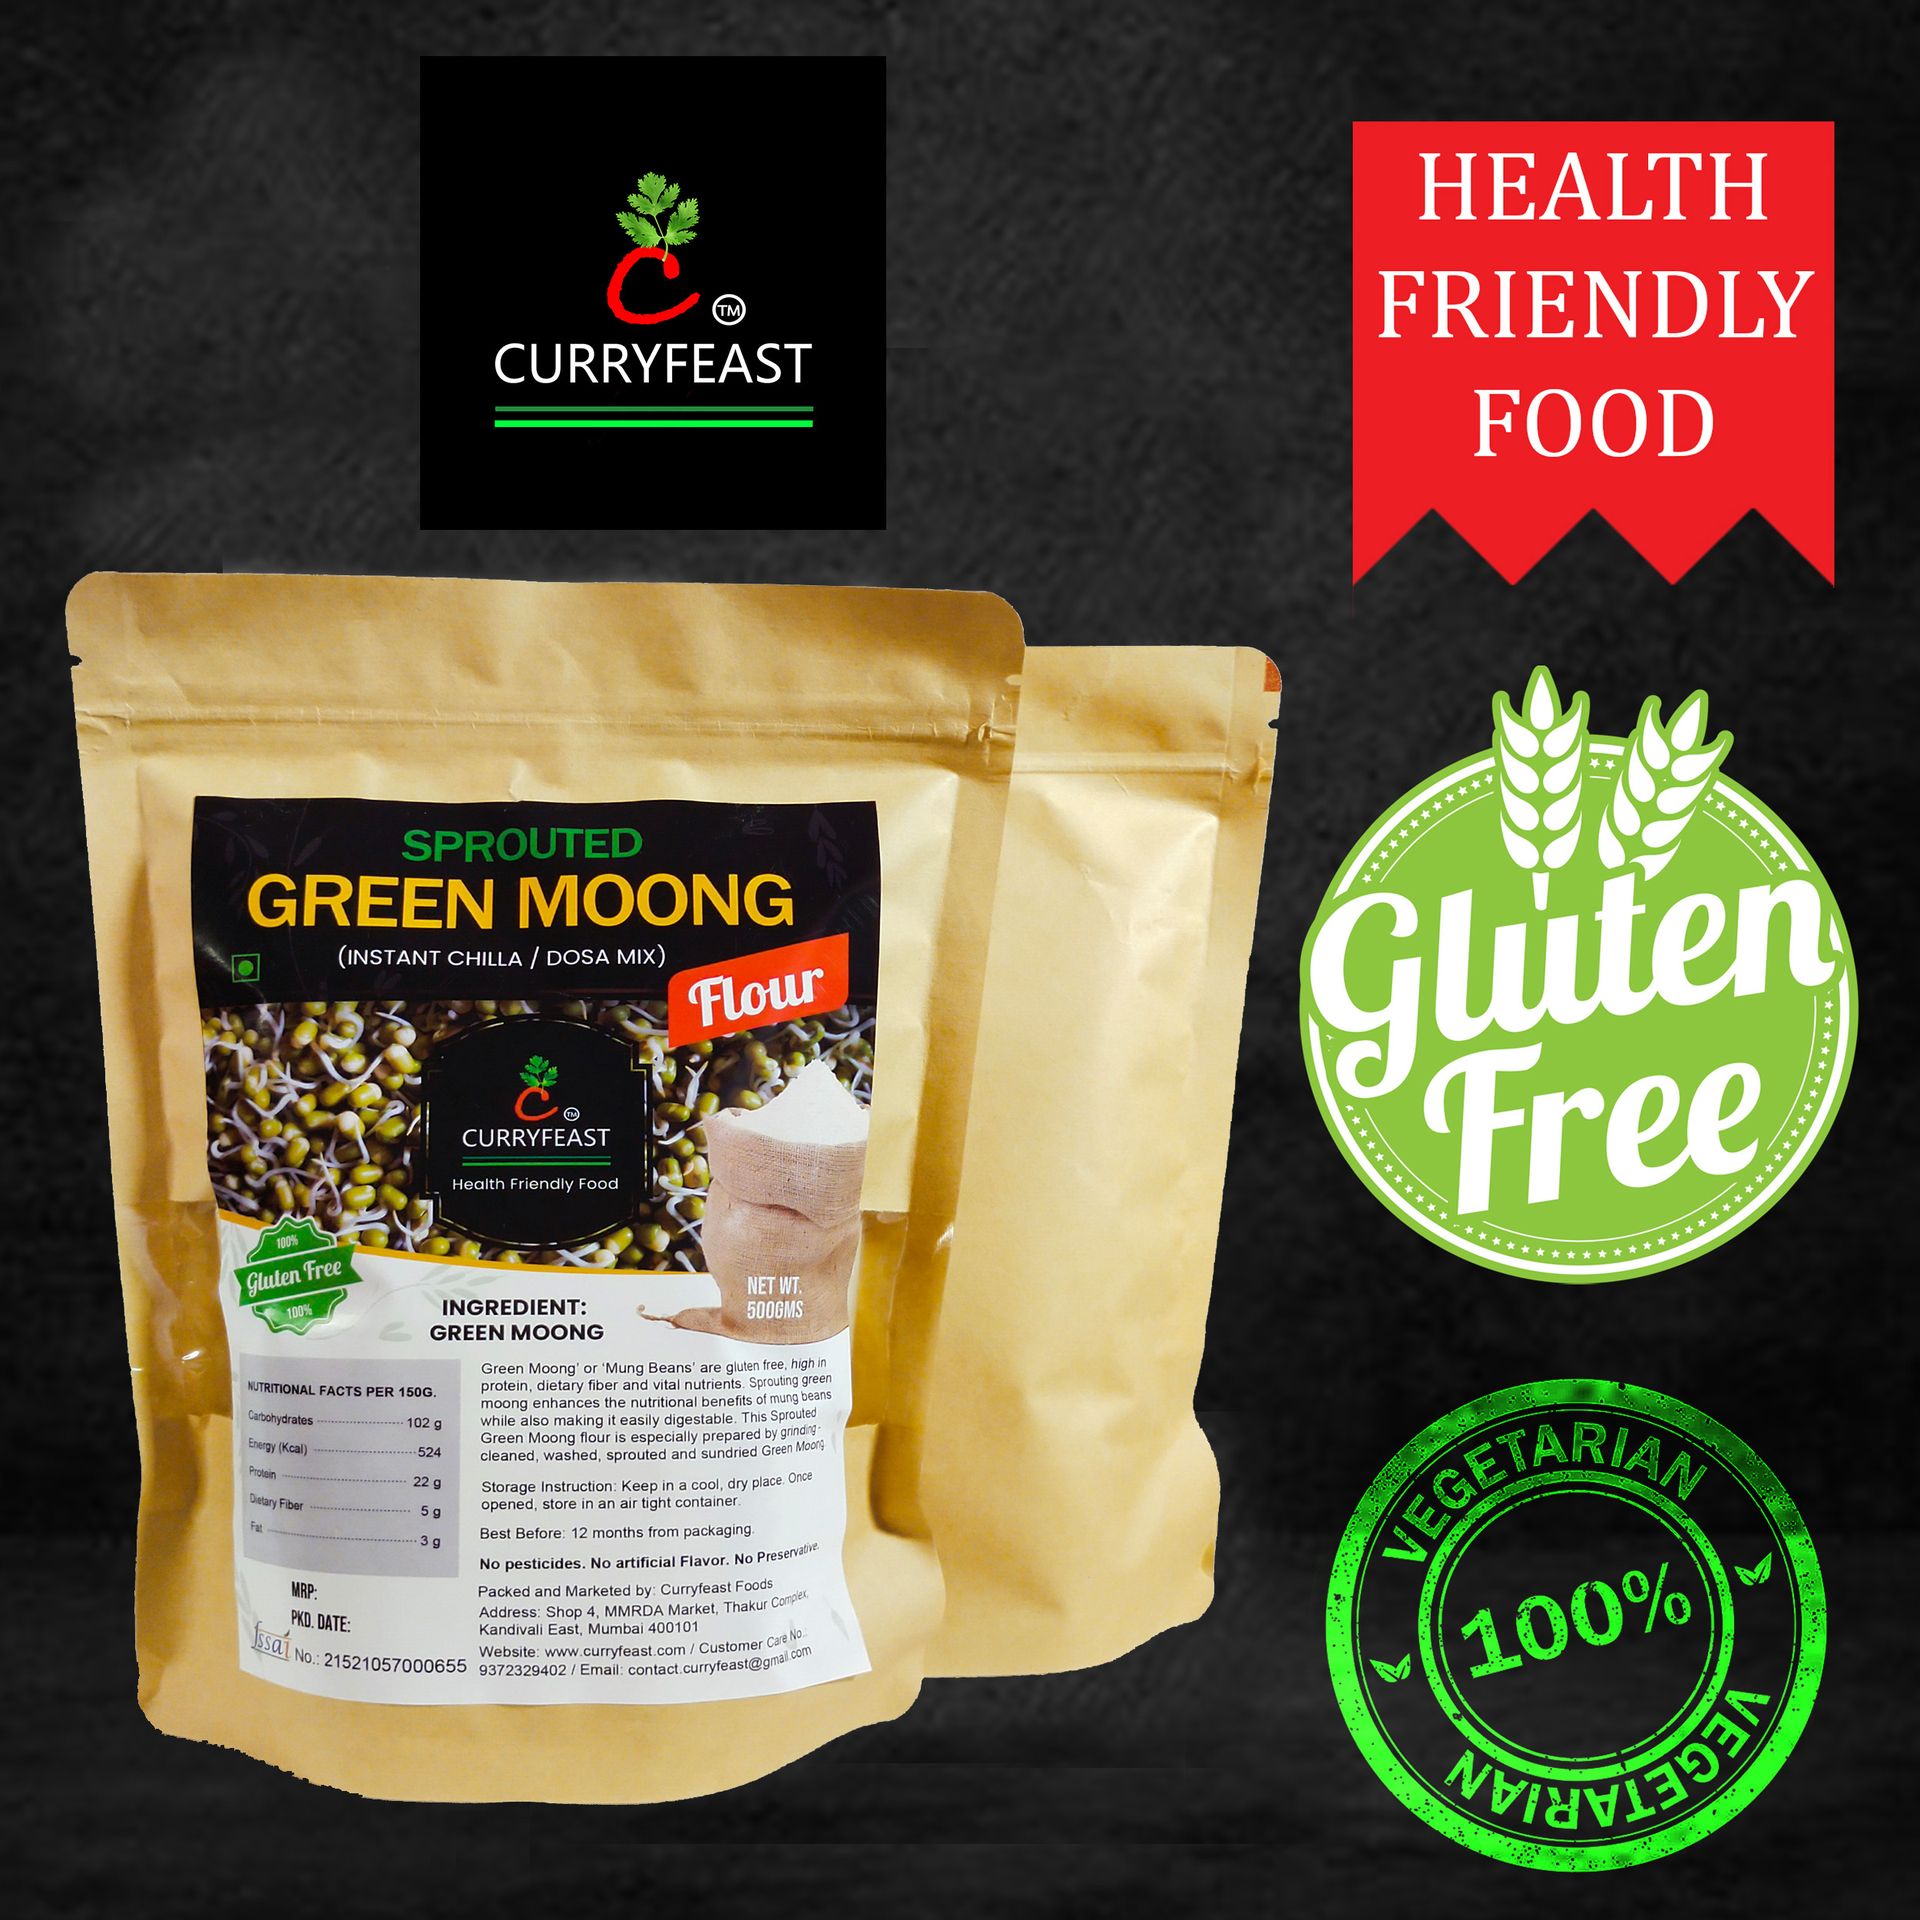 CURRYFEAST Sprouted Green Moong Flour - hfnl!fe